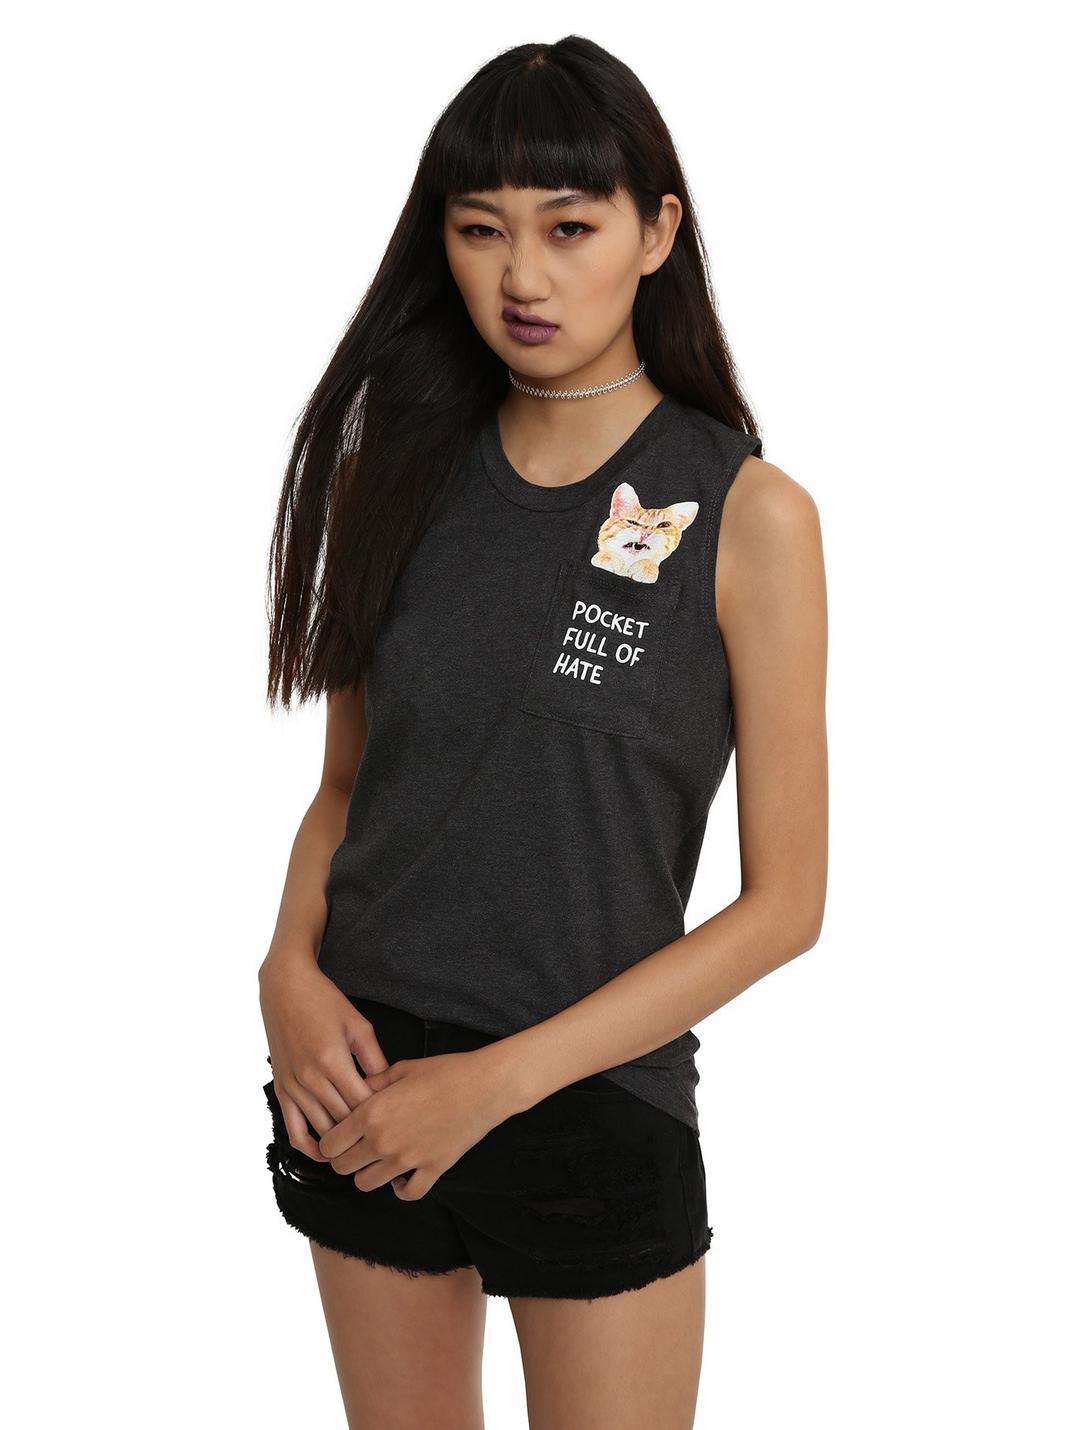 Cat Pocket Full Of Hate Girls Muscle Top, WHITE, hi-res